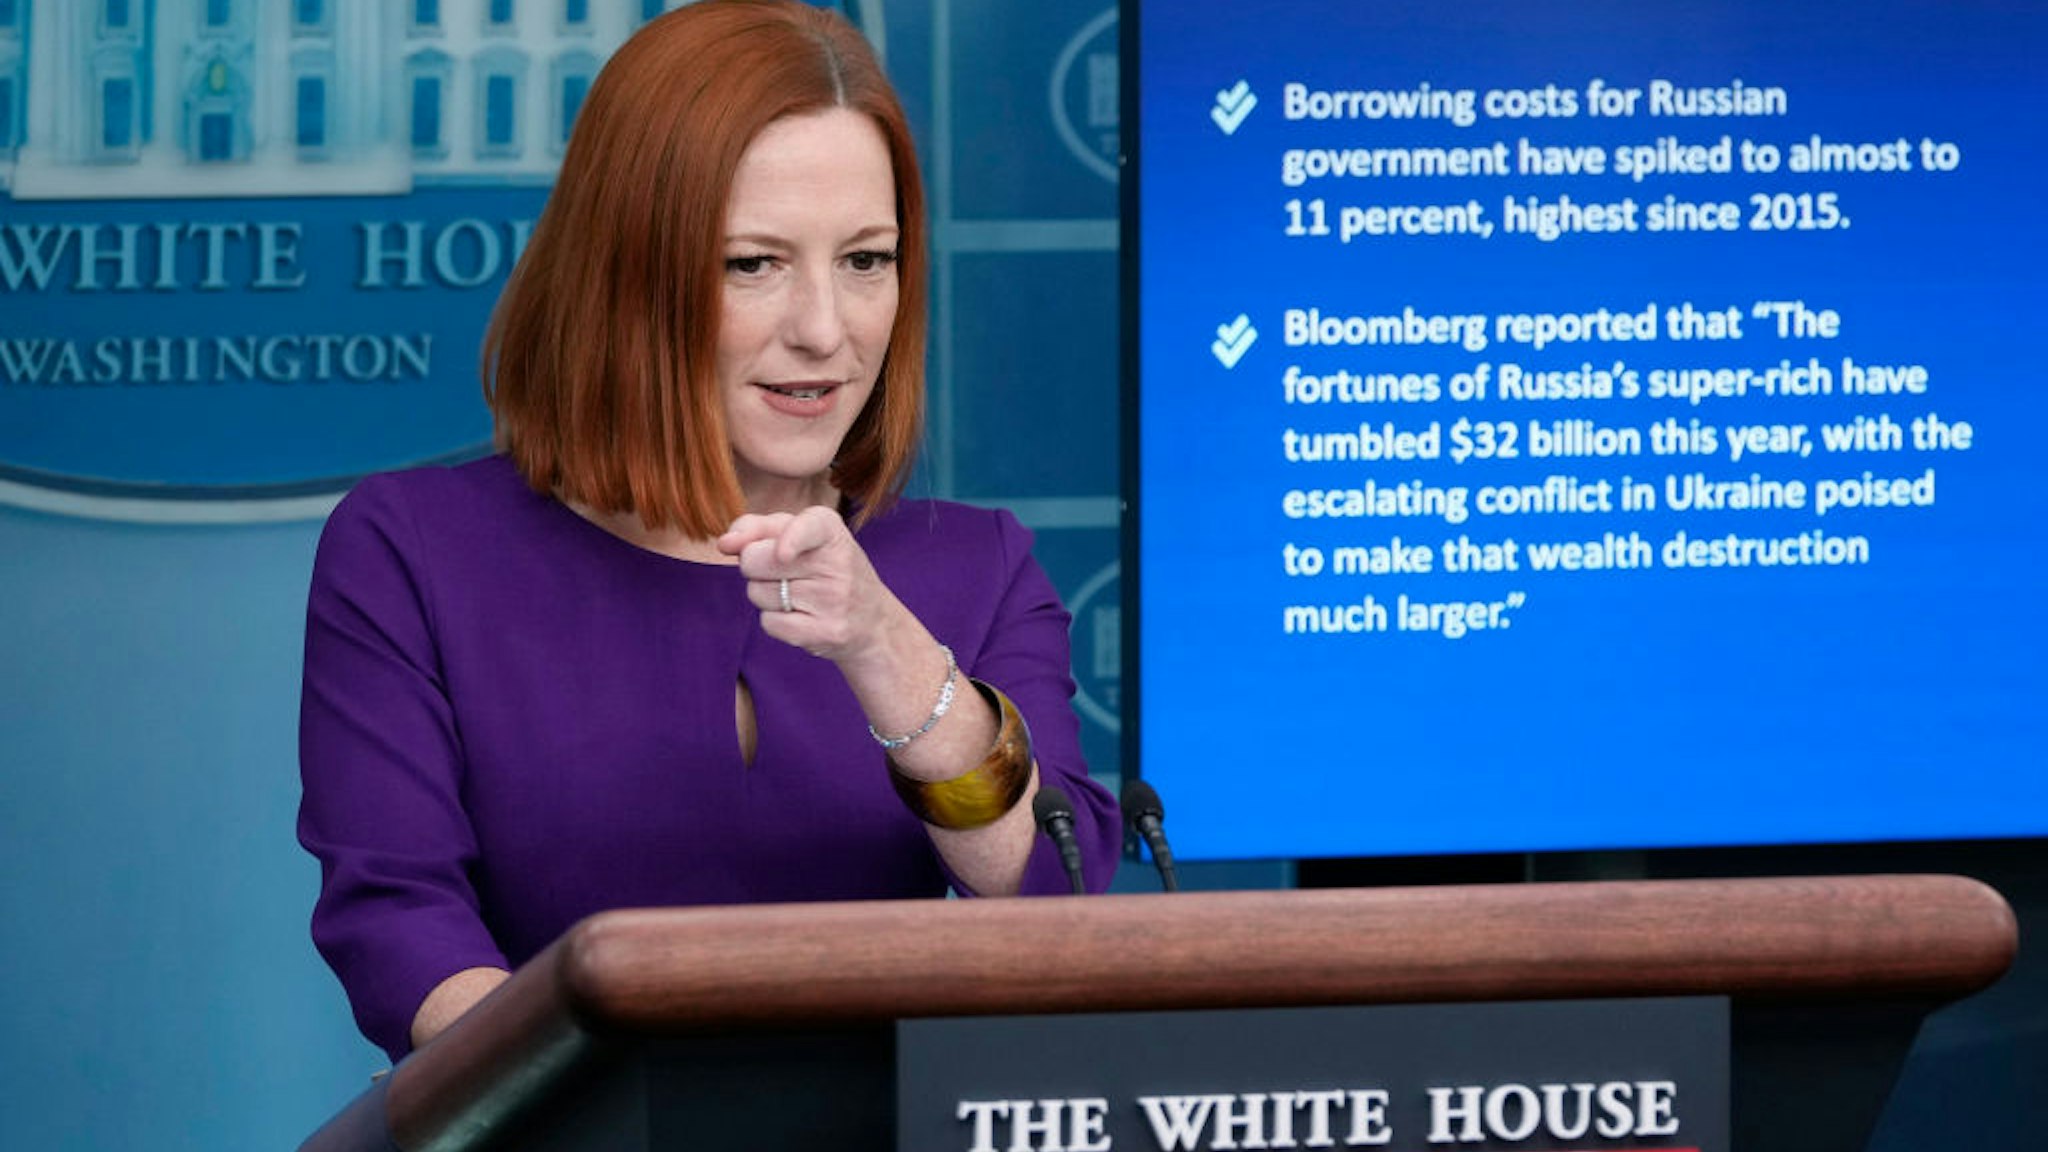 WASHINGTON, DC - FEBRUARY 23: White House Press Secretary Jen Psaki talks to reporters in the Brady Press Briefing Room at the White House on February 23, 2022 in Washington, DC. Psaki briefed reporters about the White House's economic sanctions on Russia after its military moved into break-away regions of eastern Ukraine. (Photo by Drew Angerer/Getty Images)